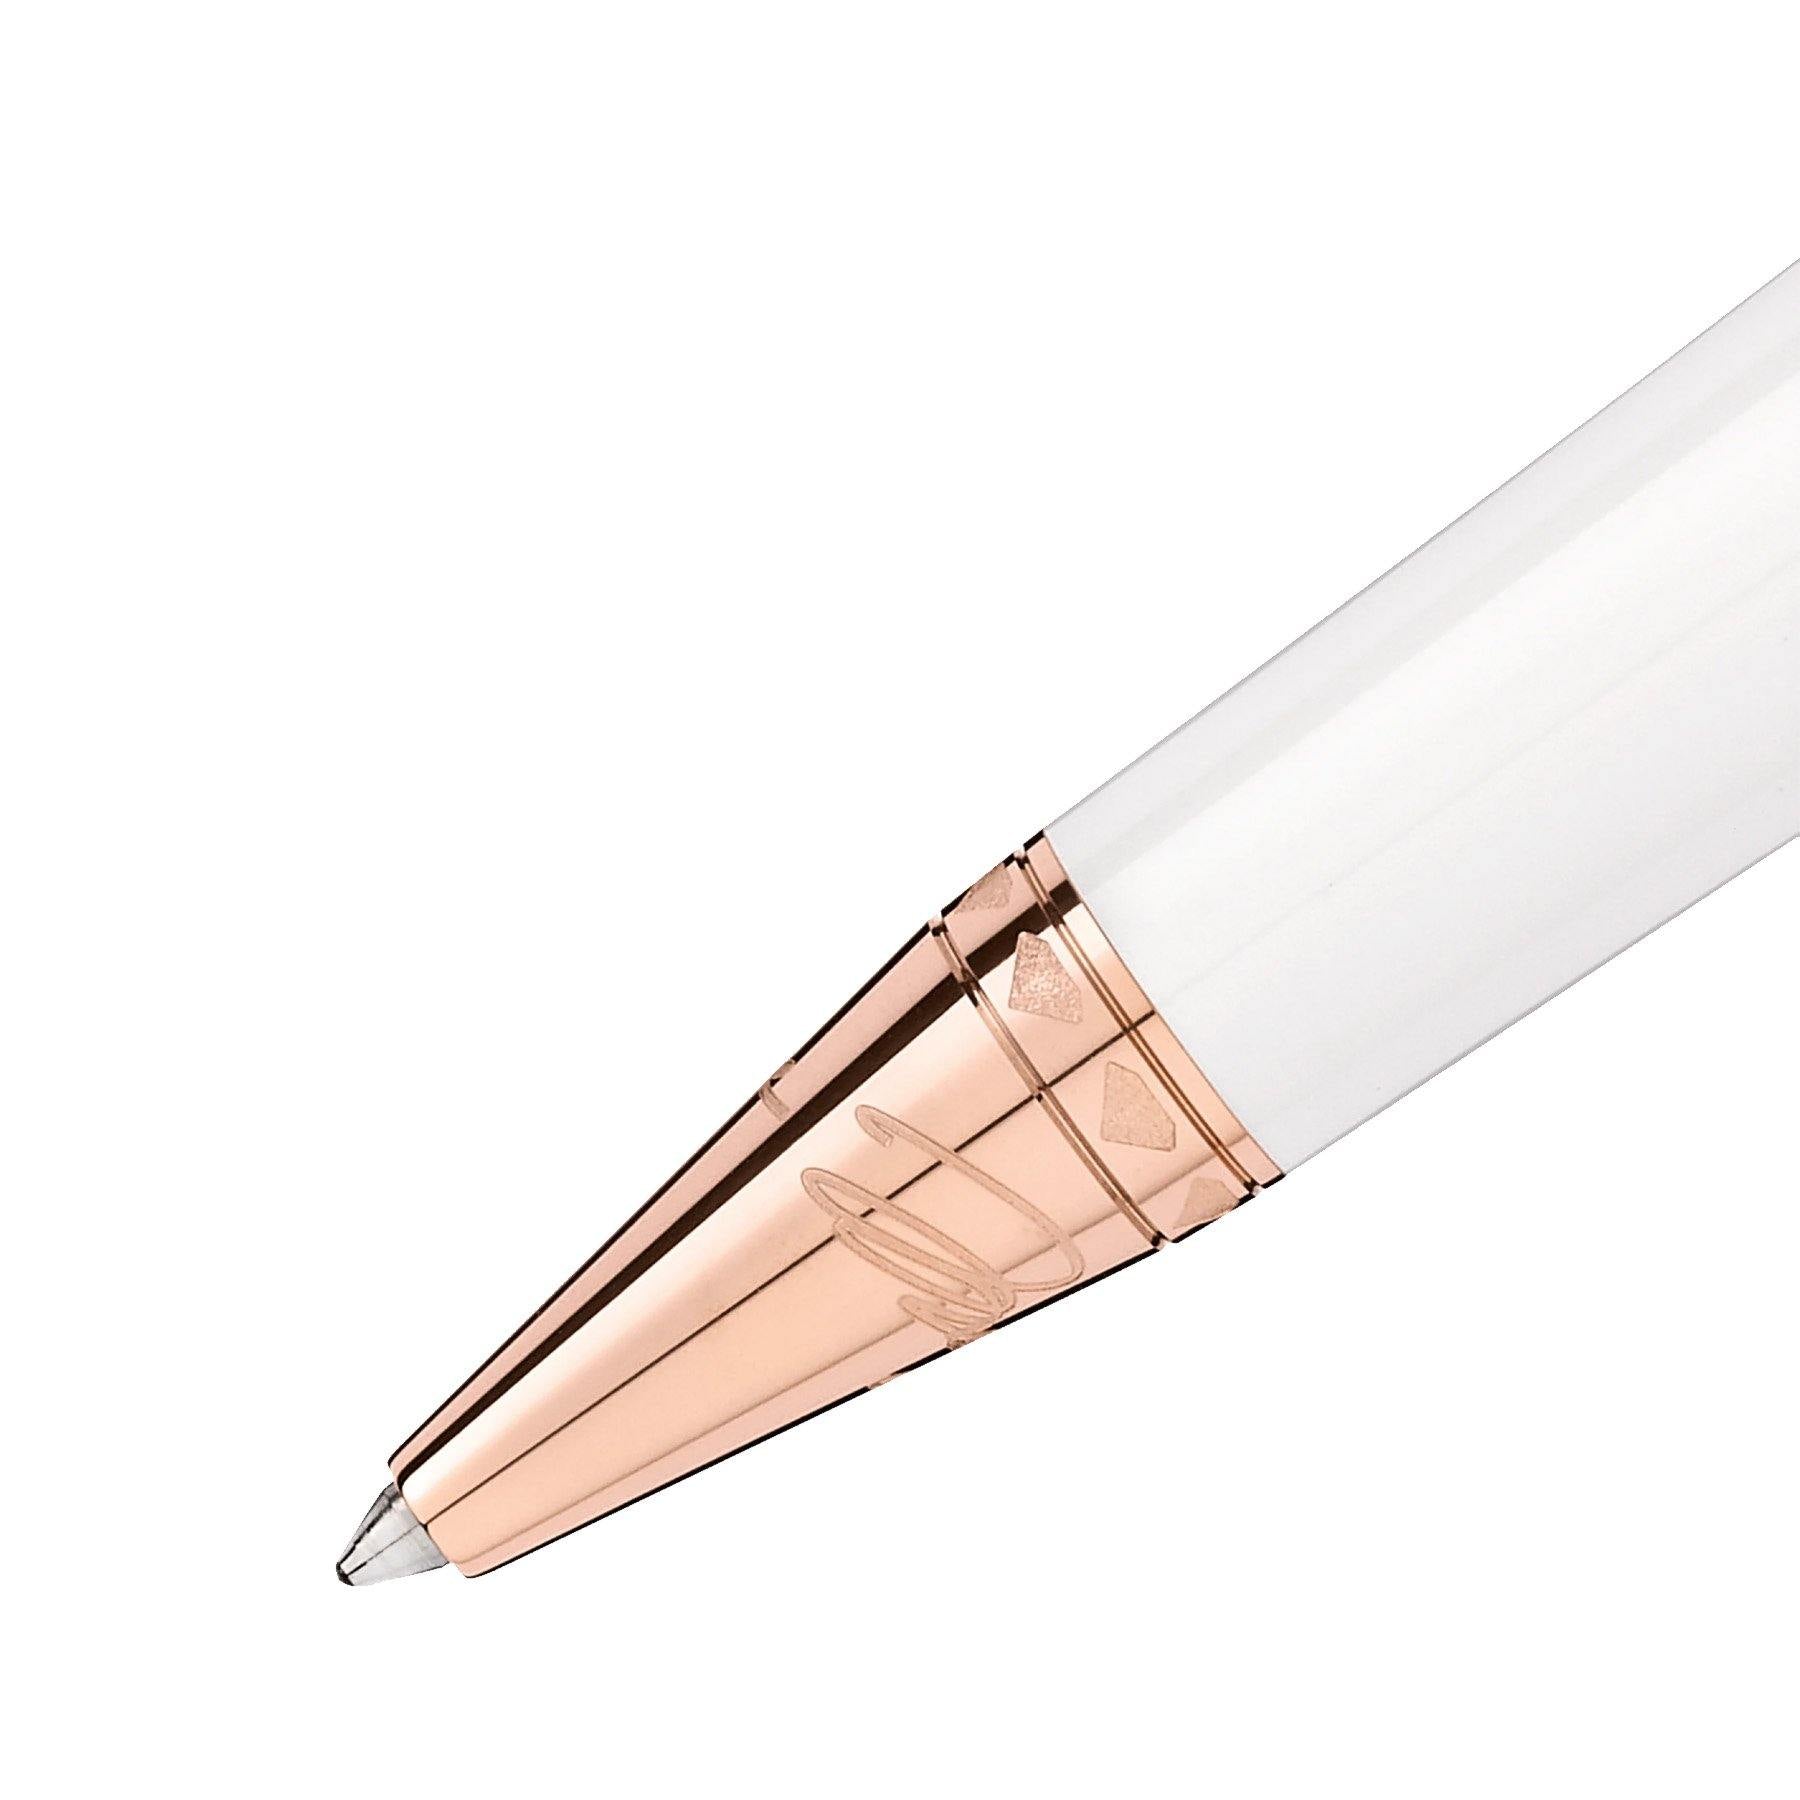 Muses Marilyn Monroe Special Edition Pearl Ballpoint Pen - Cosmos Boutique New Jersey